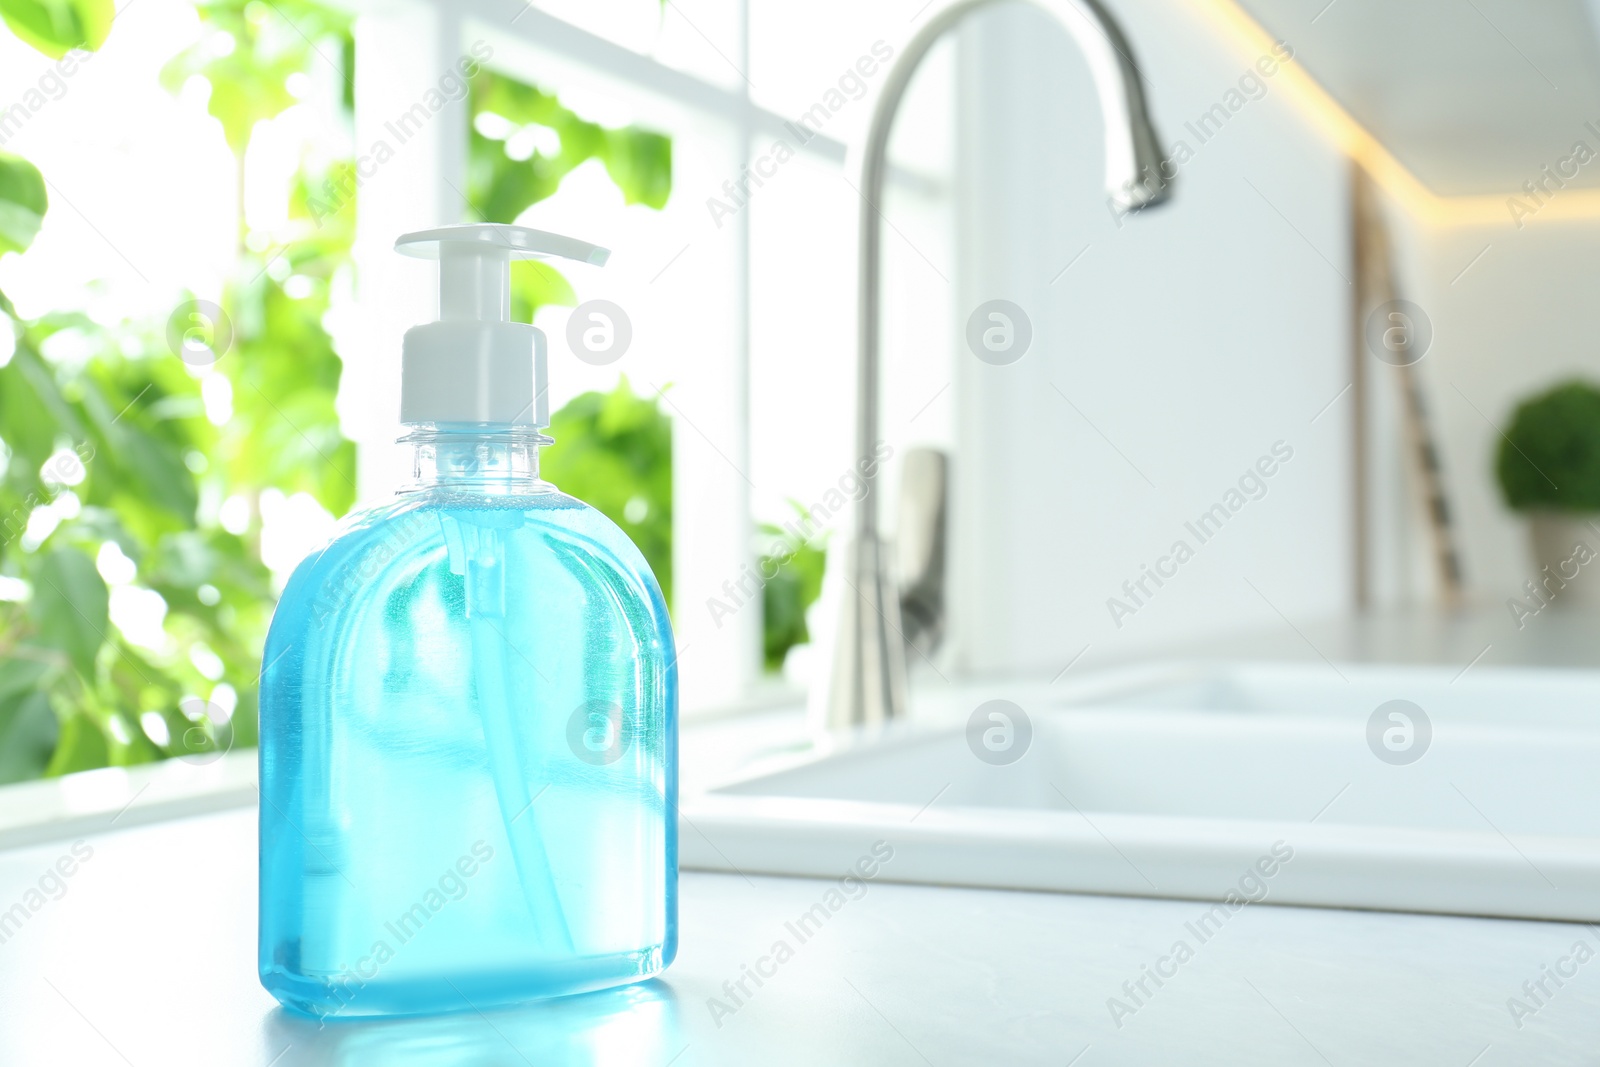 Photo of Bottle of antibacterial soap near sink indoors. Personal hygiene during COVID-19 pandemic